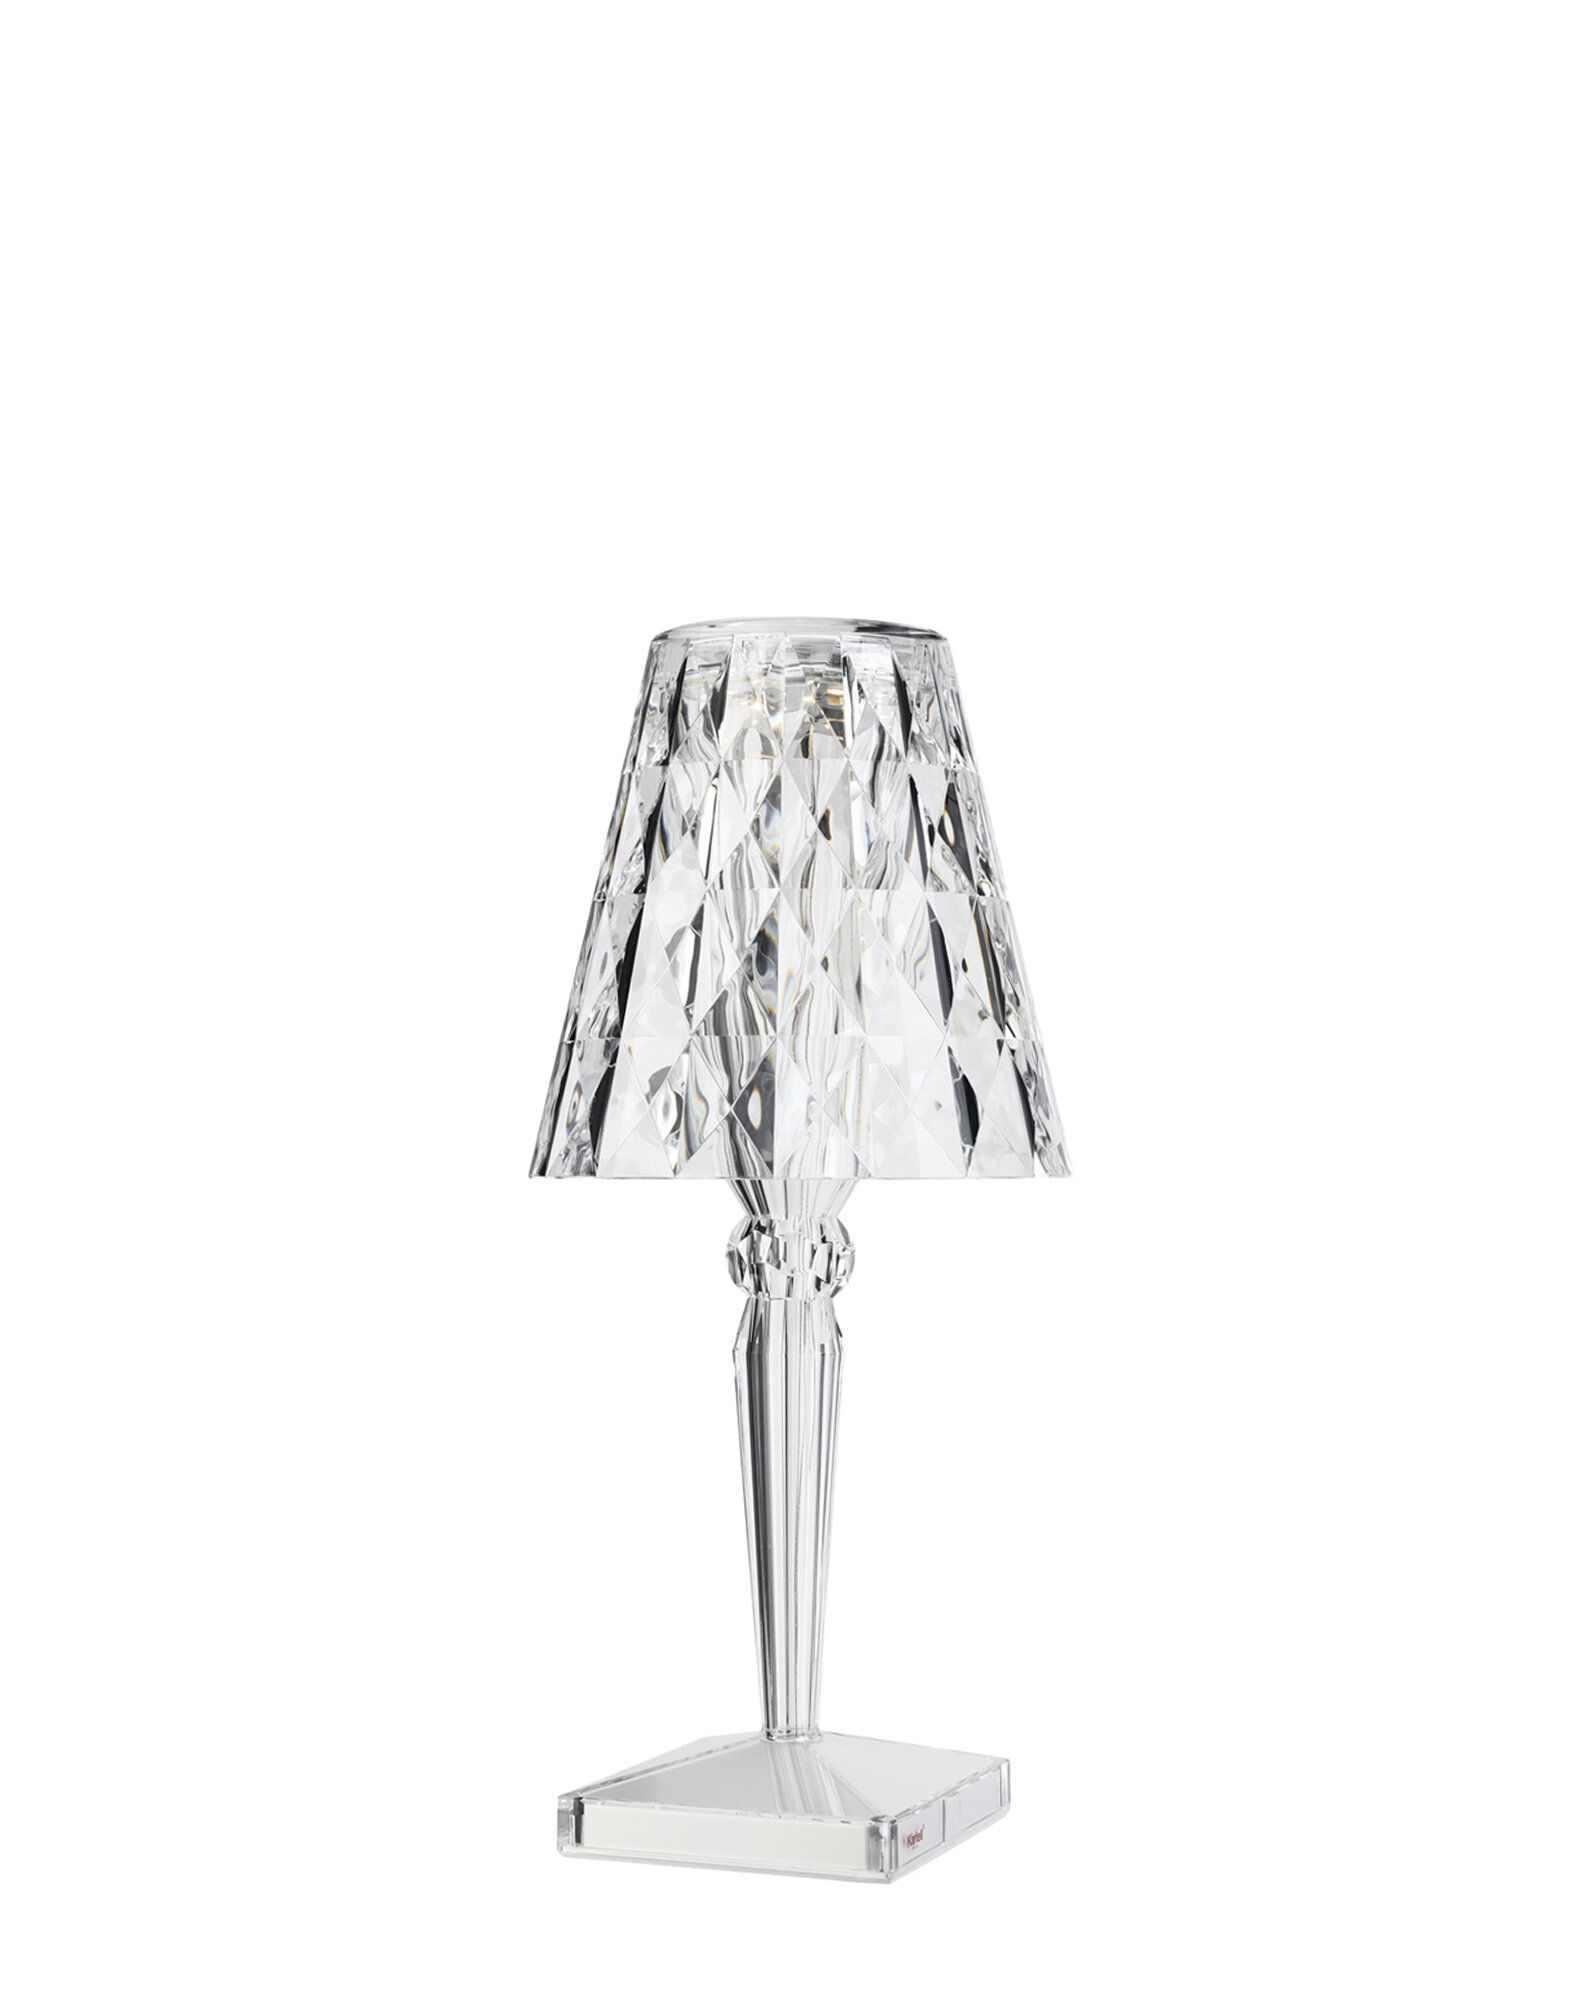 Kartell Portable LED Rechargeable Battery Table Lamp